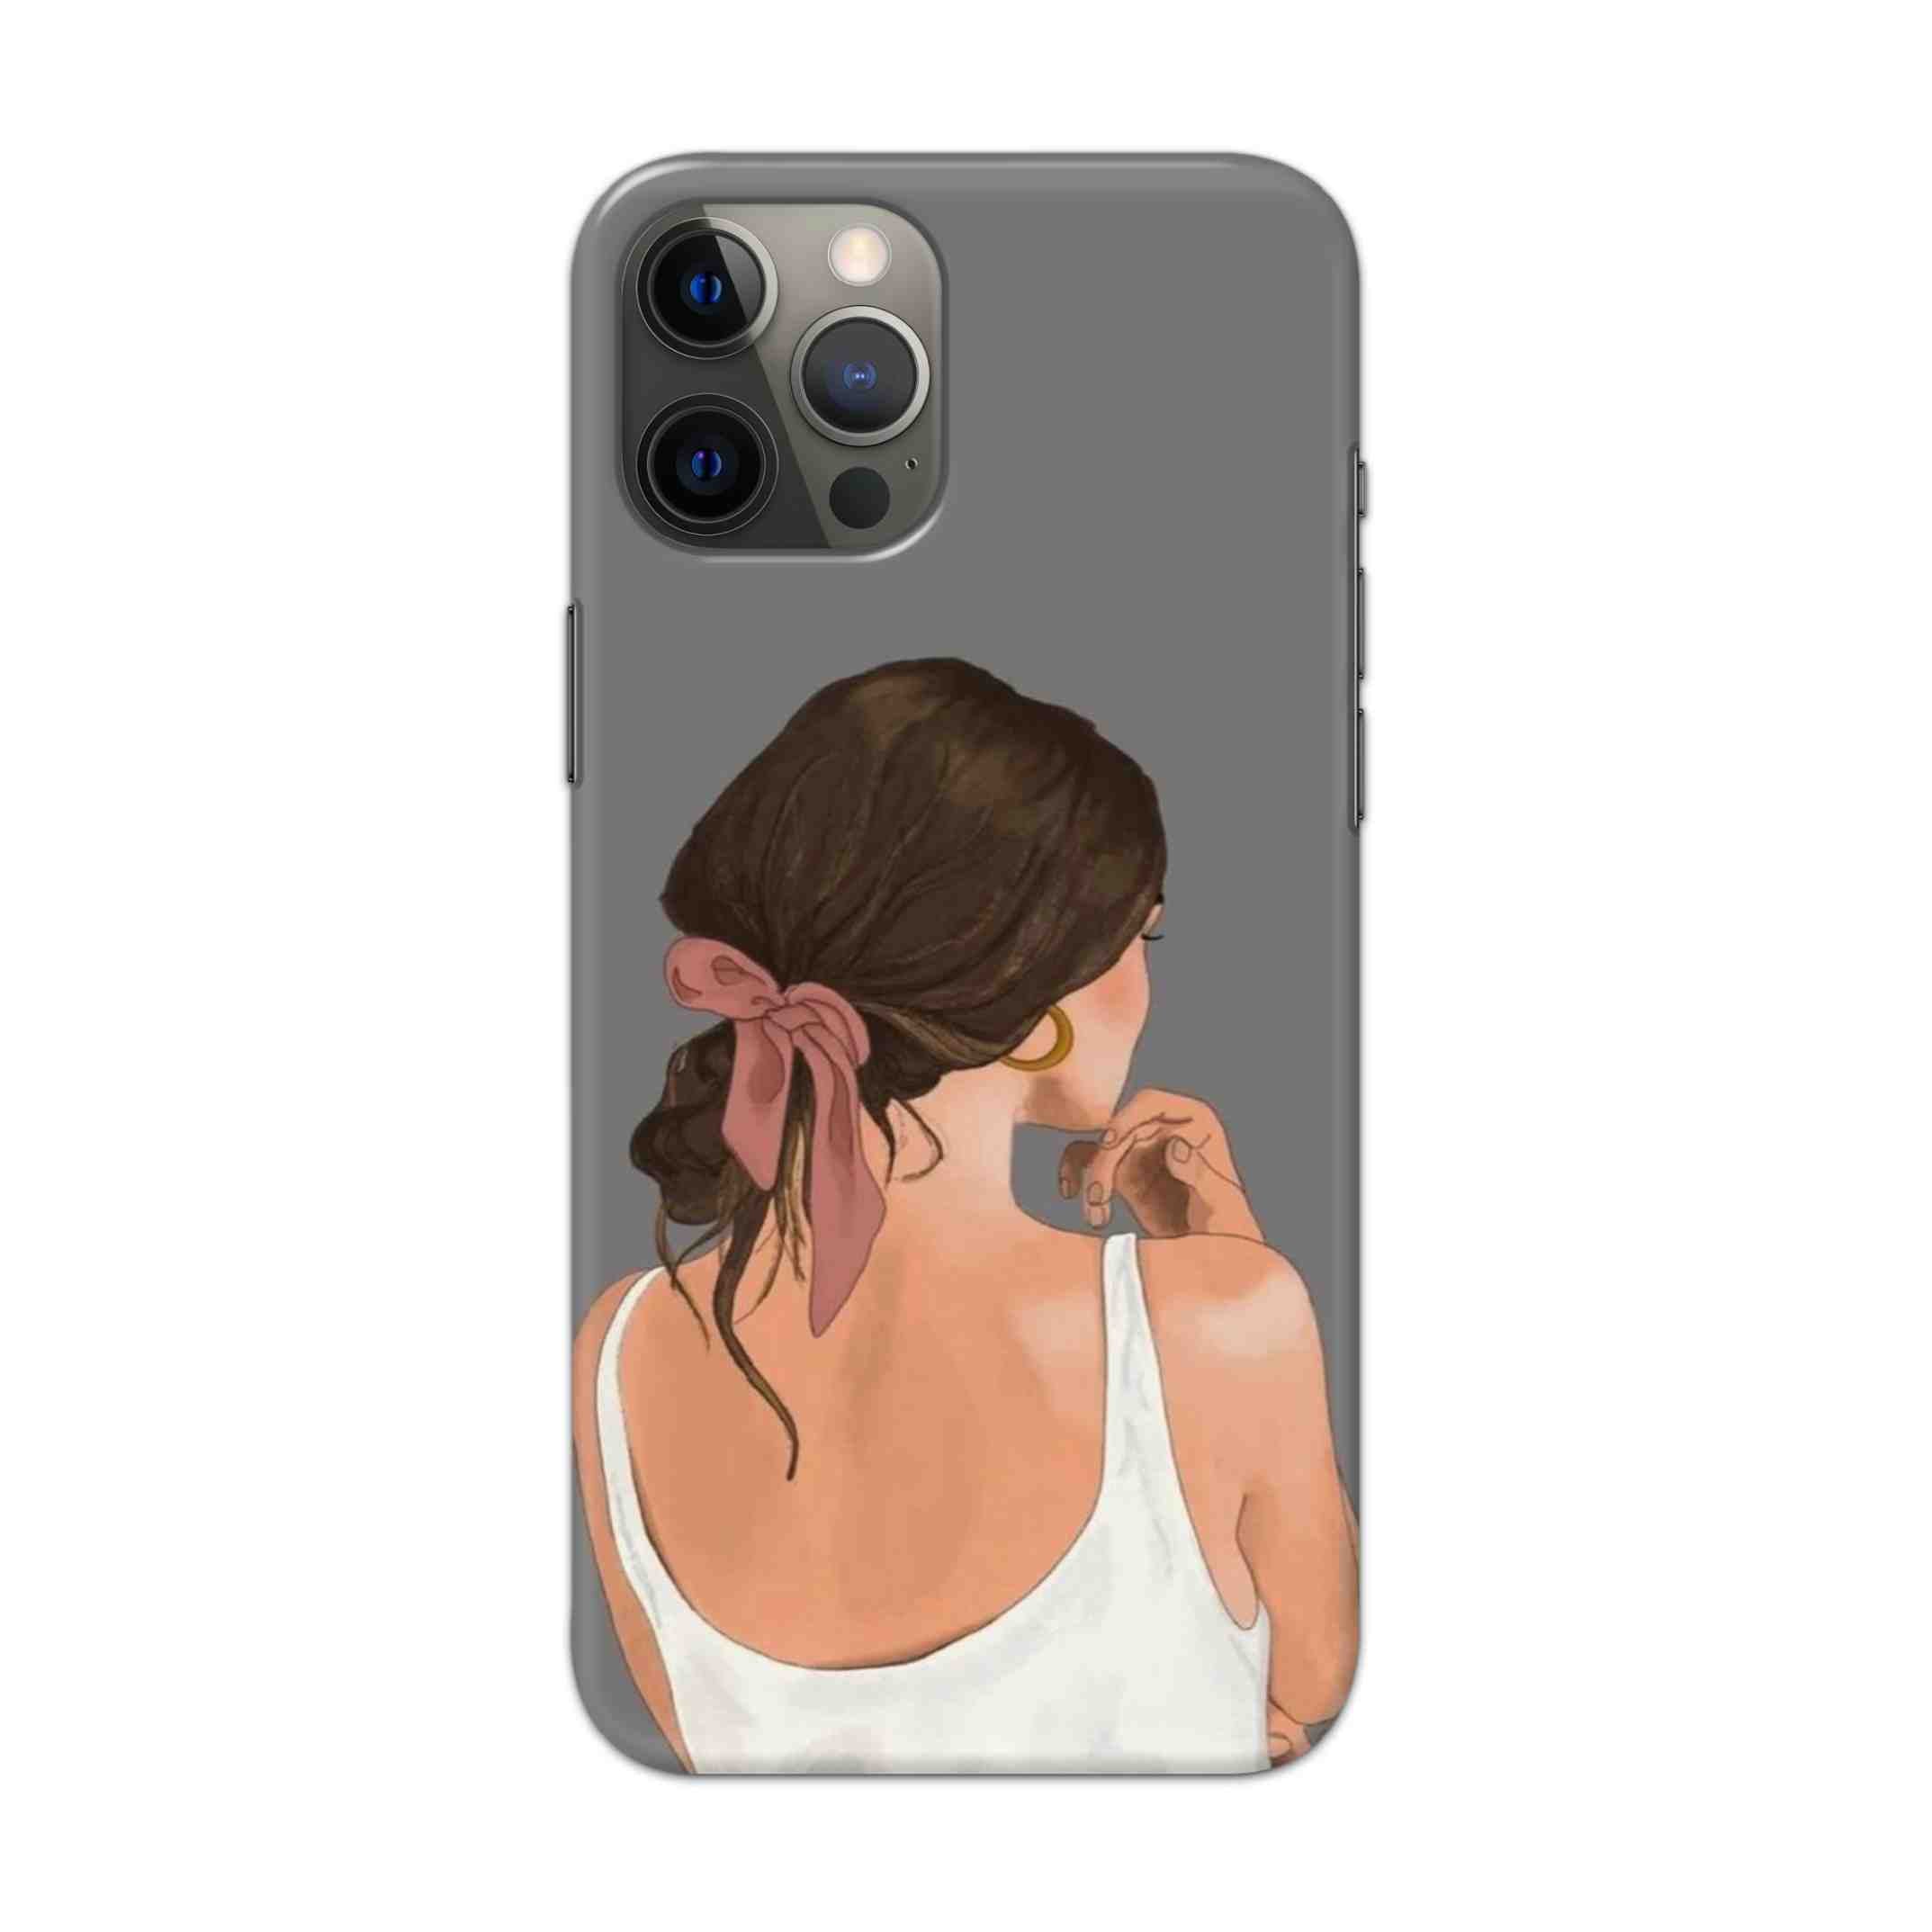 Buy Thinking Girl Hard Back Mobile Phone Case Cover For Apple iPhone 13 Pro Online